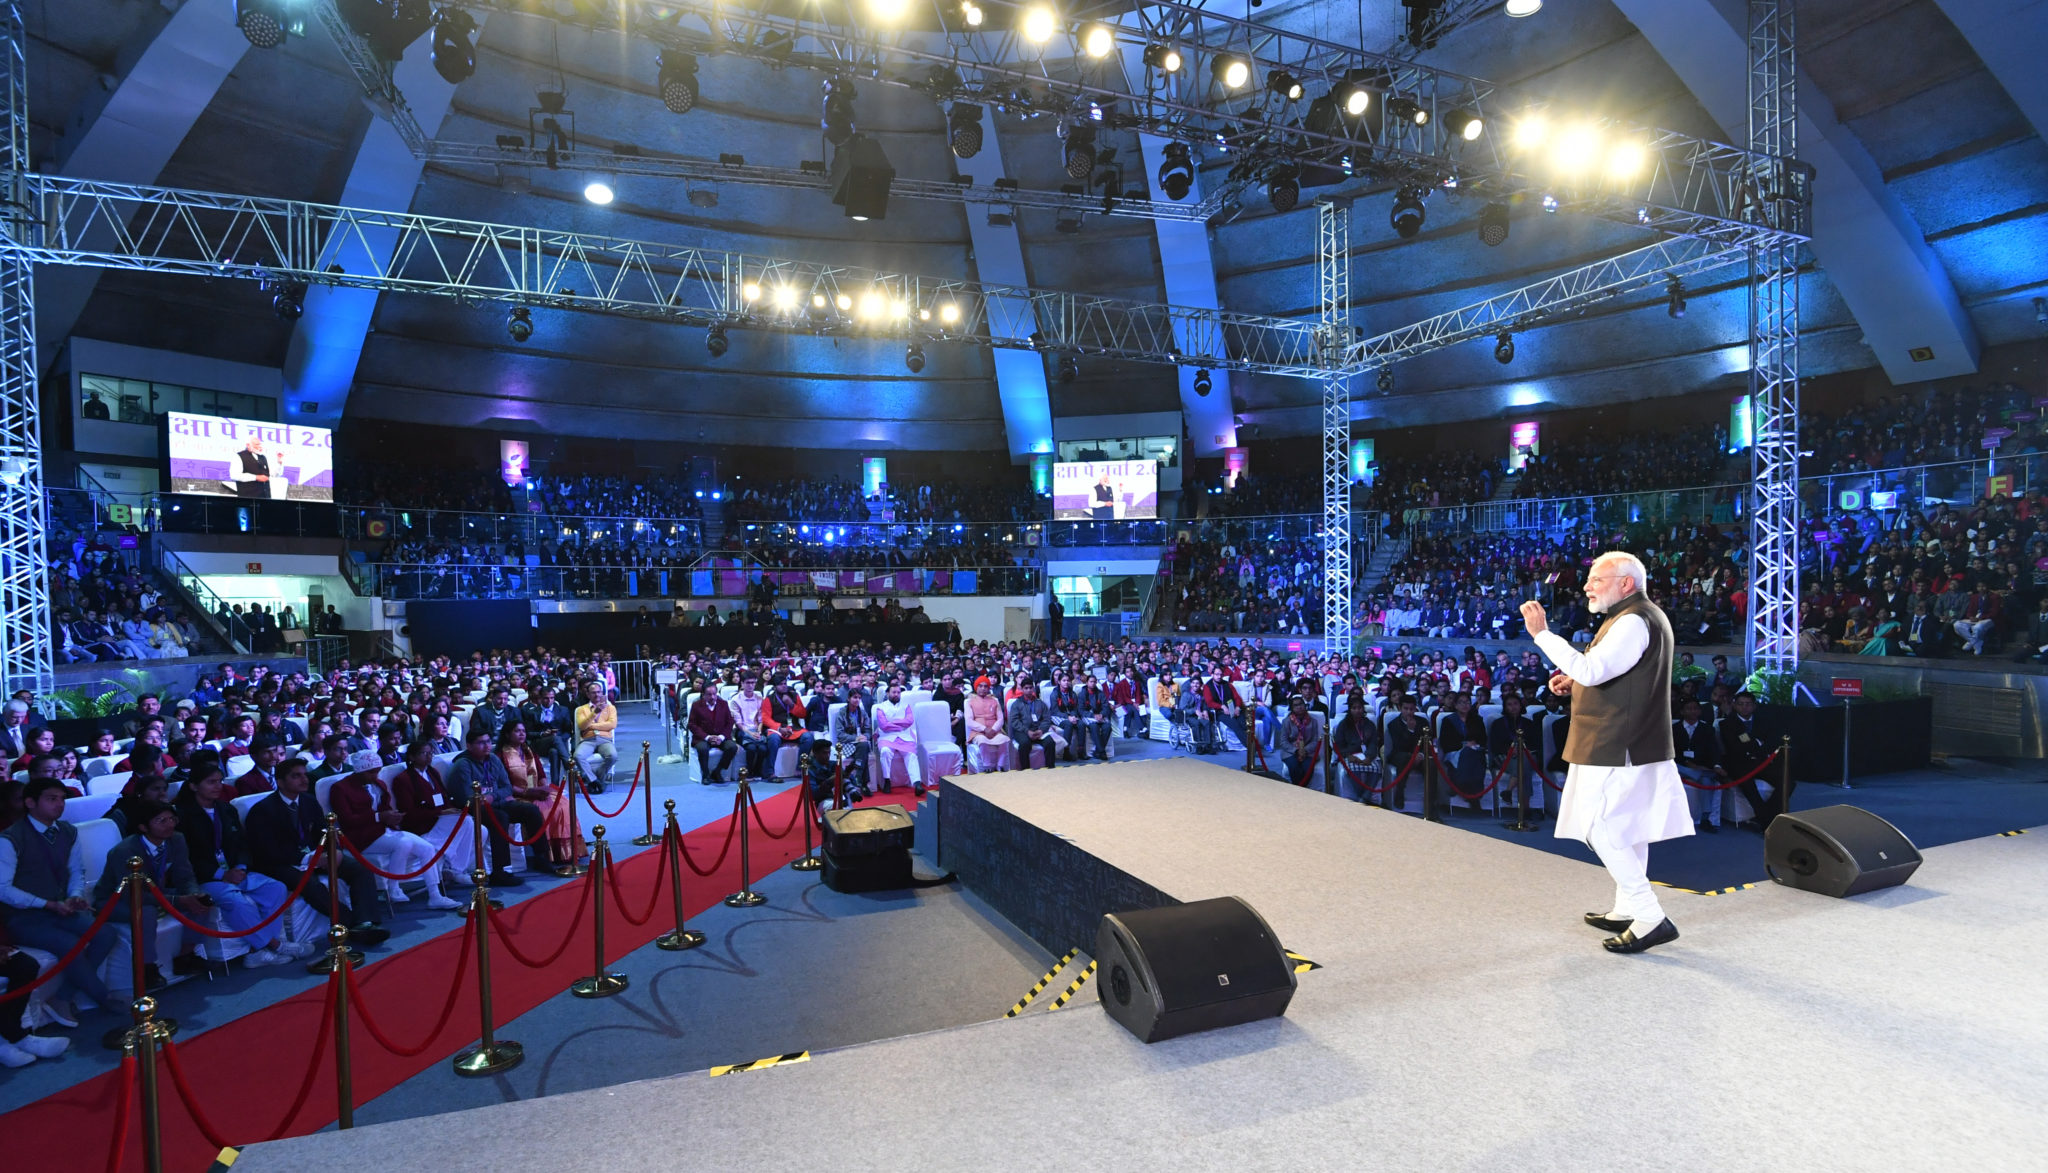 PM interacts with students, teachers and parents at “Pariksha Pe Charcha 2.0”